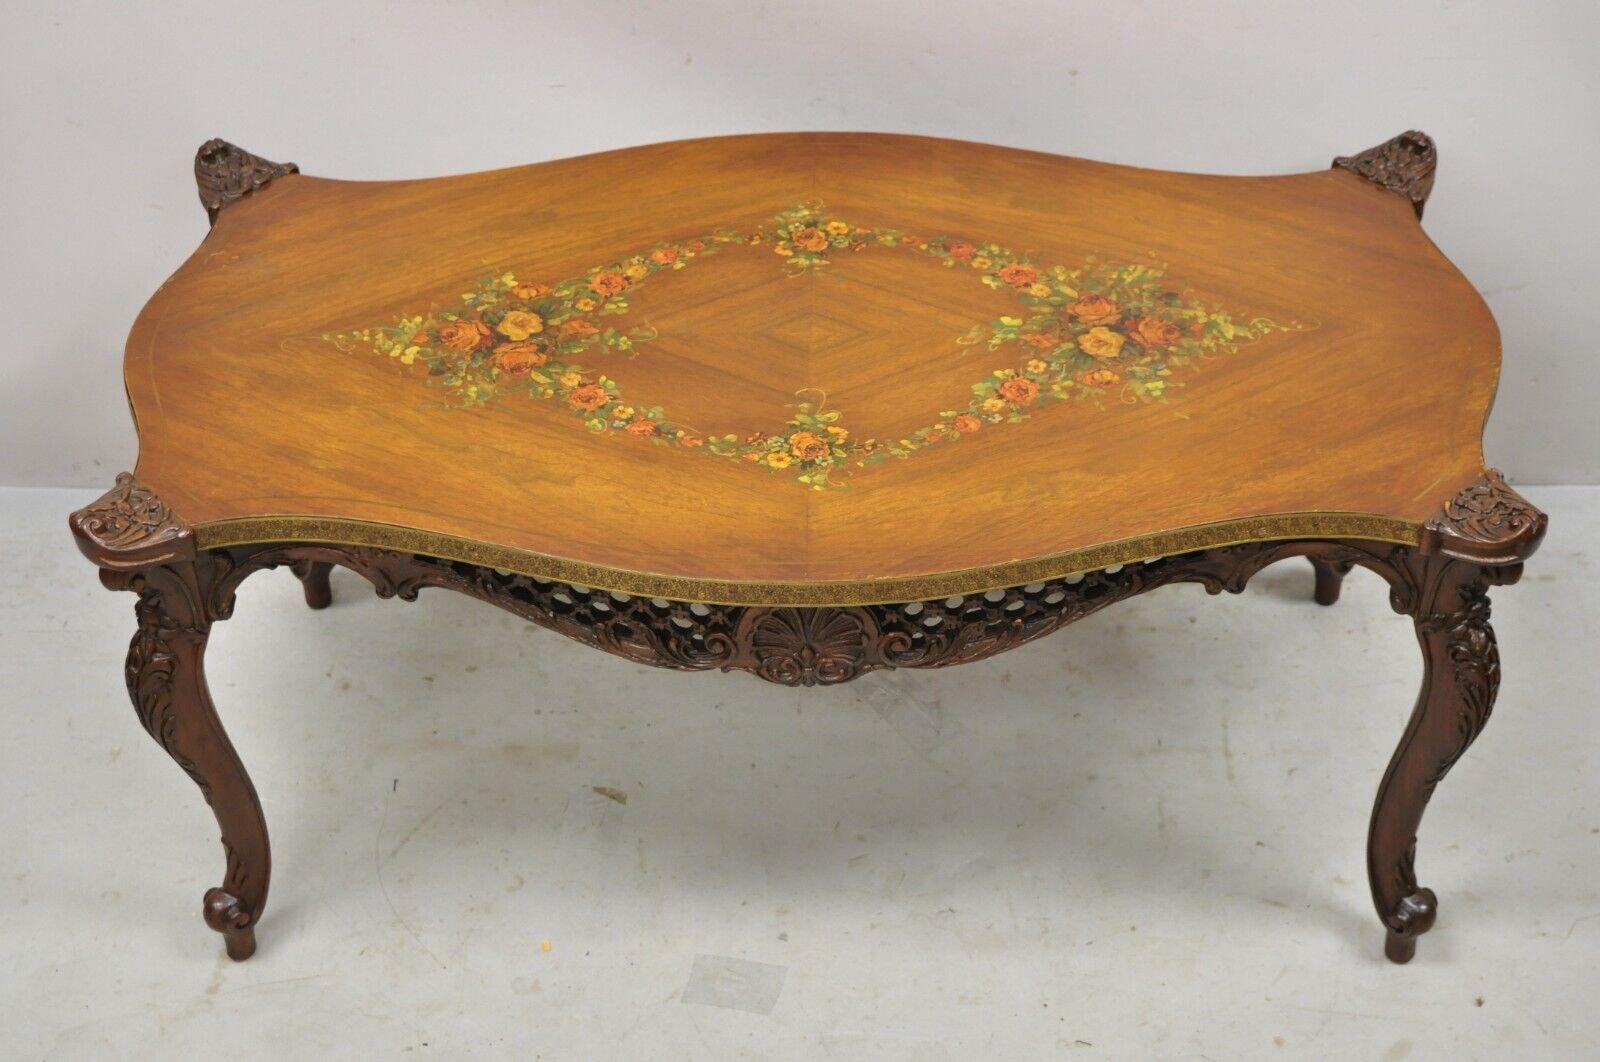 Vintage French Louis XV style walnut coffee table with hand painted floral top. Item features a pierce carved fretwork skirt, decorated brass rim, shaped top, hand painted floral top, cabriole legs, very nice vintage item, great style and form.